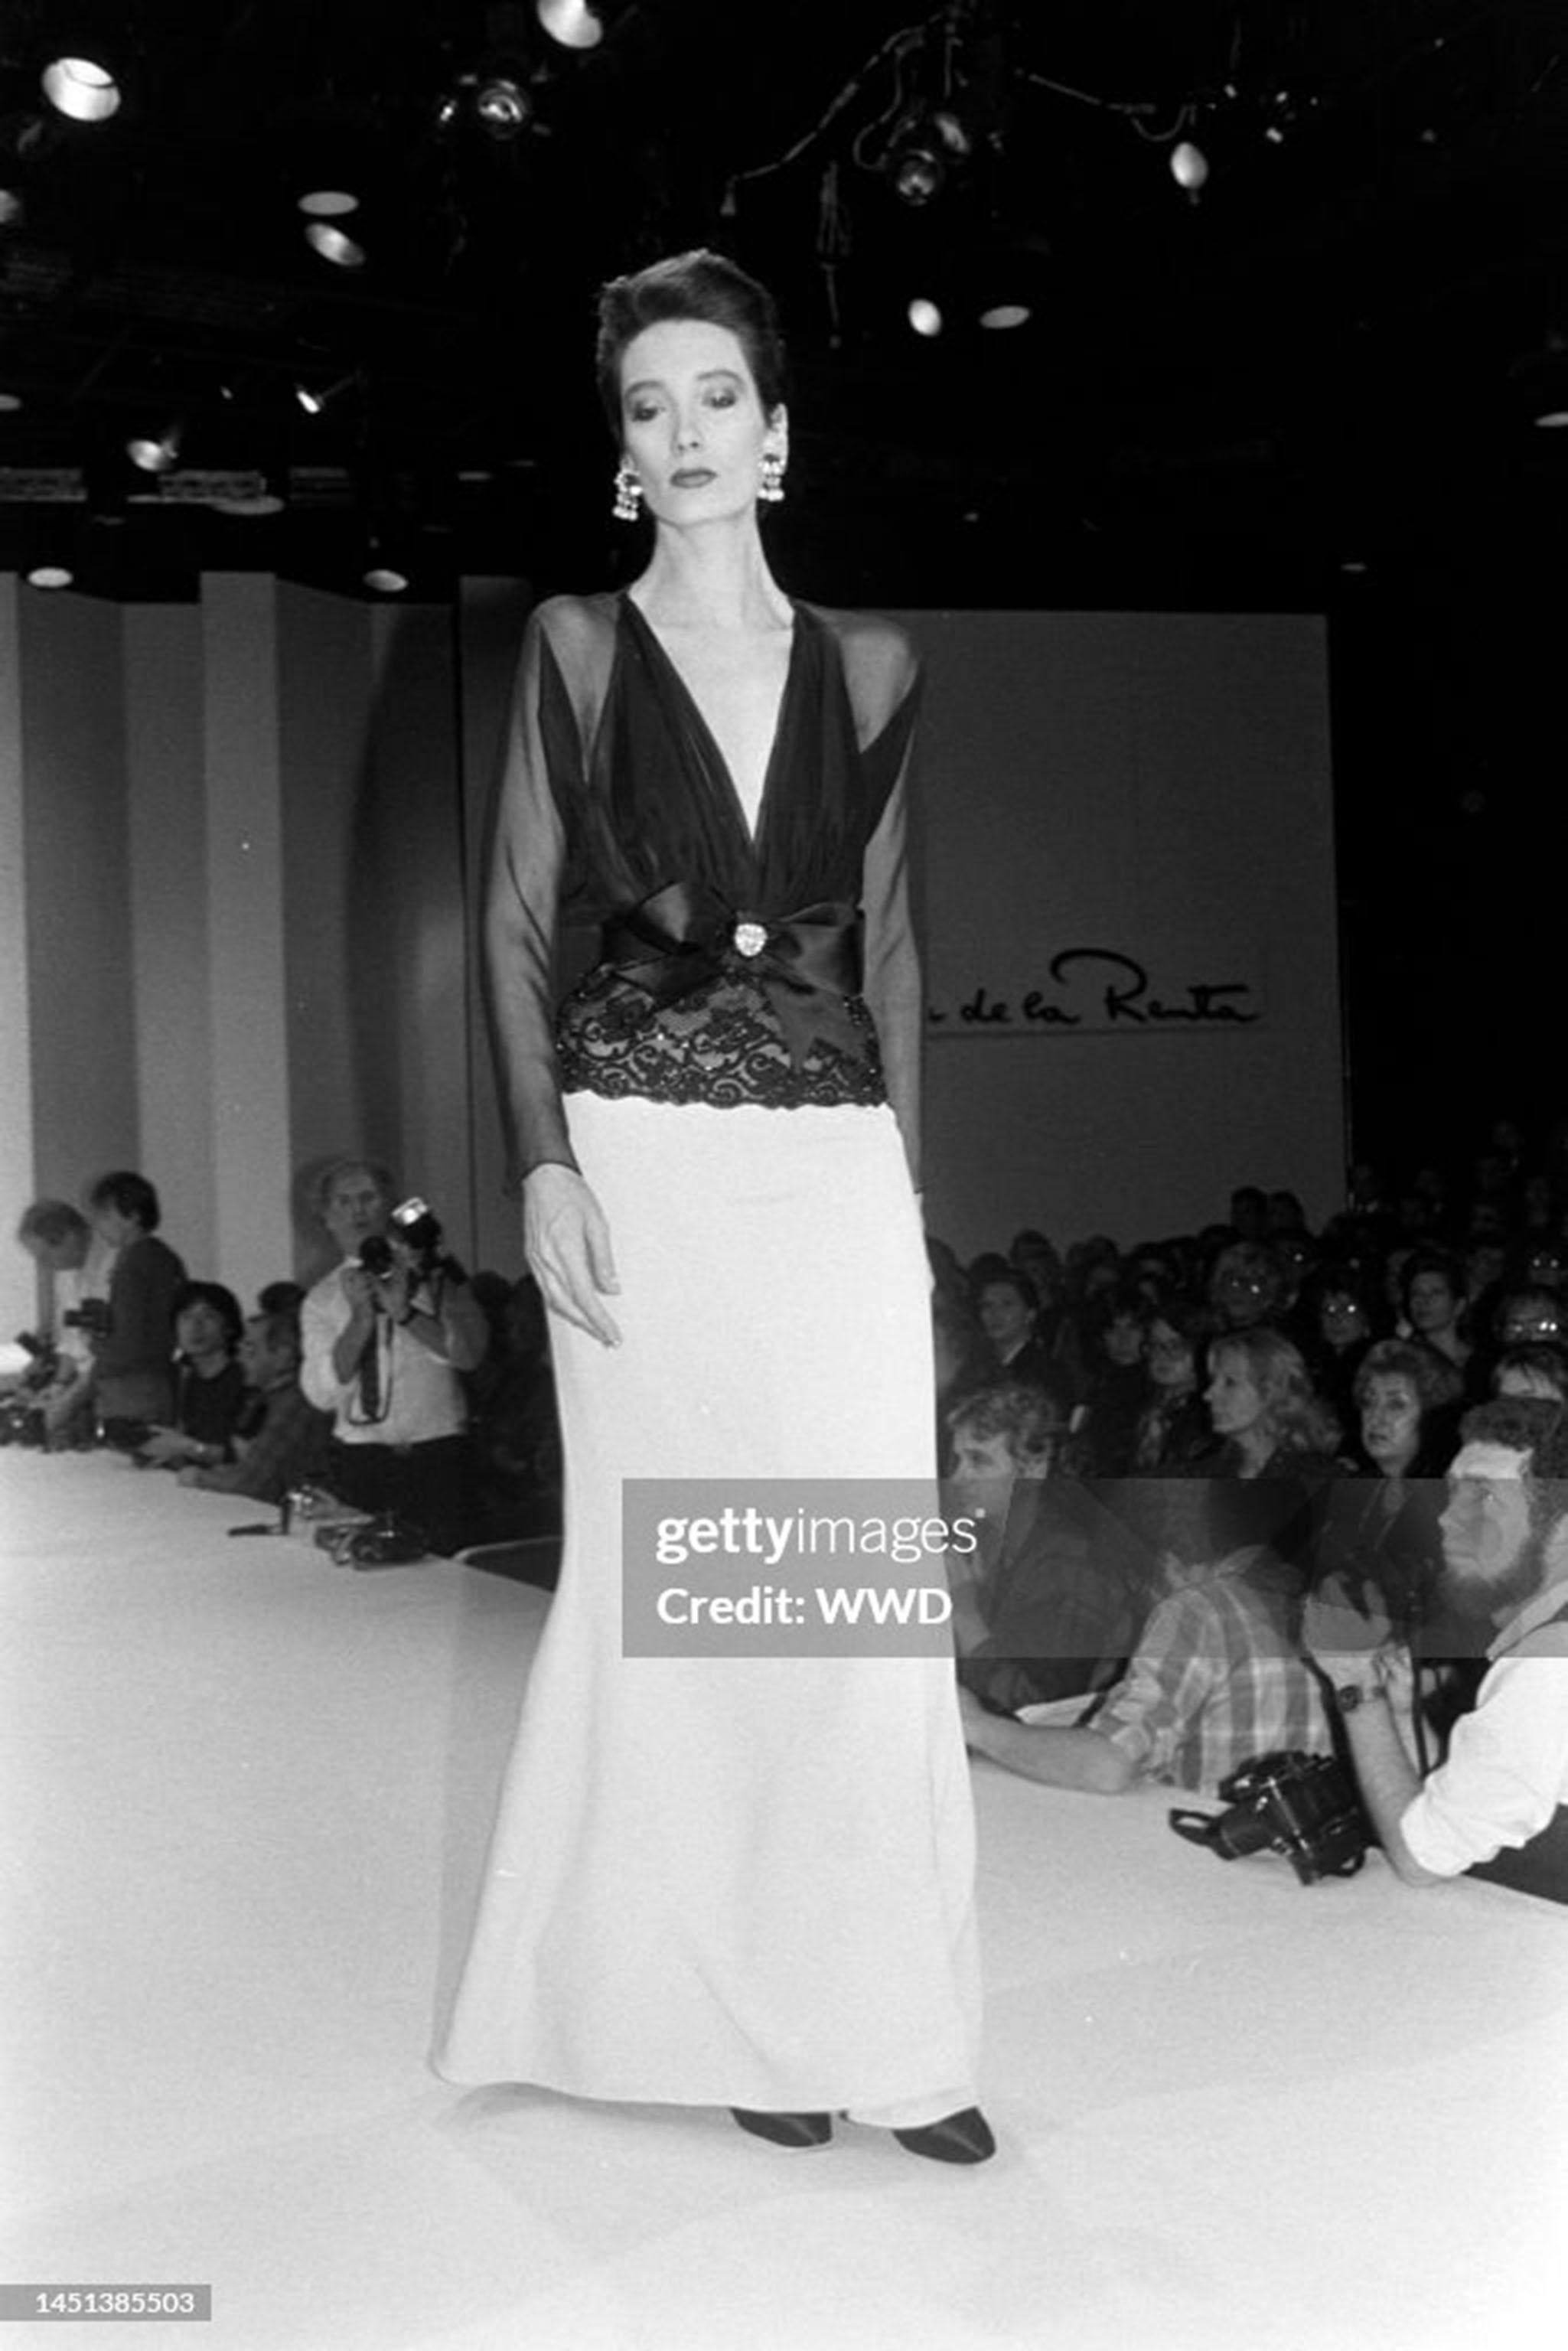 A simply stunning and well-documented Oscar de la Renta black sheer chiffon and pale pink silk gown dating back to his 1986 spring/summer collection. Oscar de la Renta was one of the world's leading fashion designers. Trained by Cristóbal Balenciaga